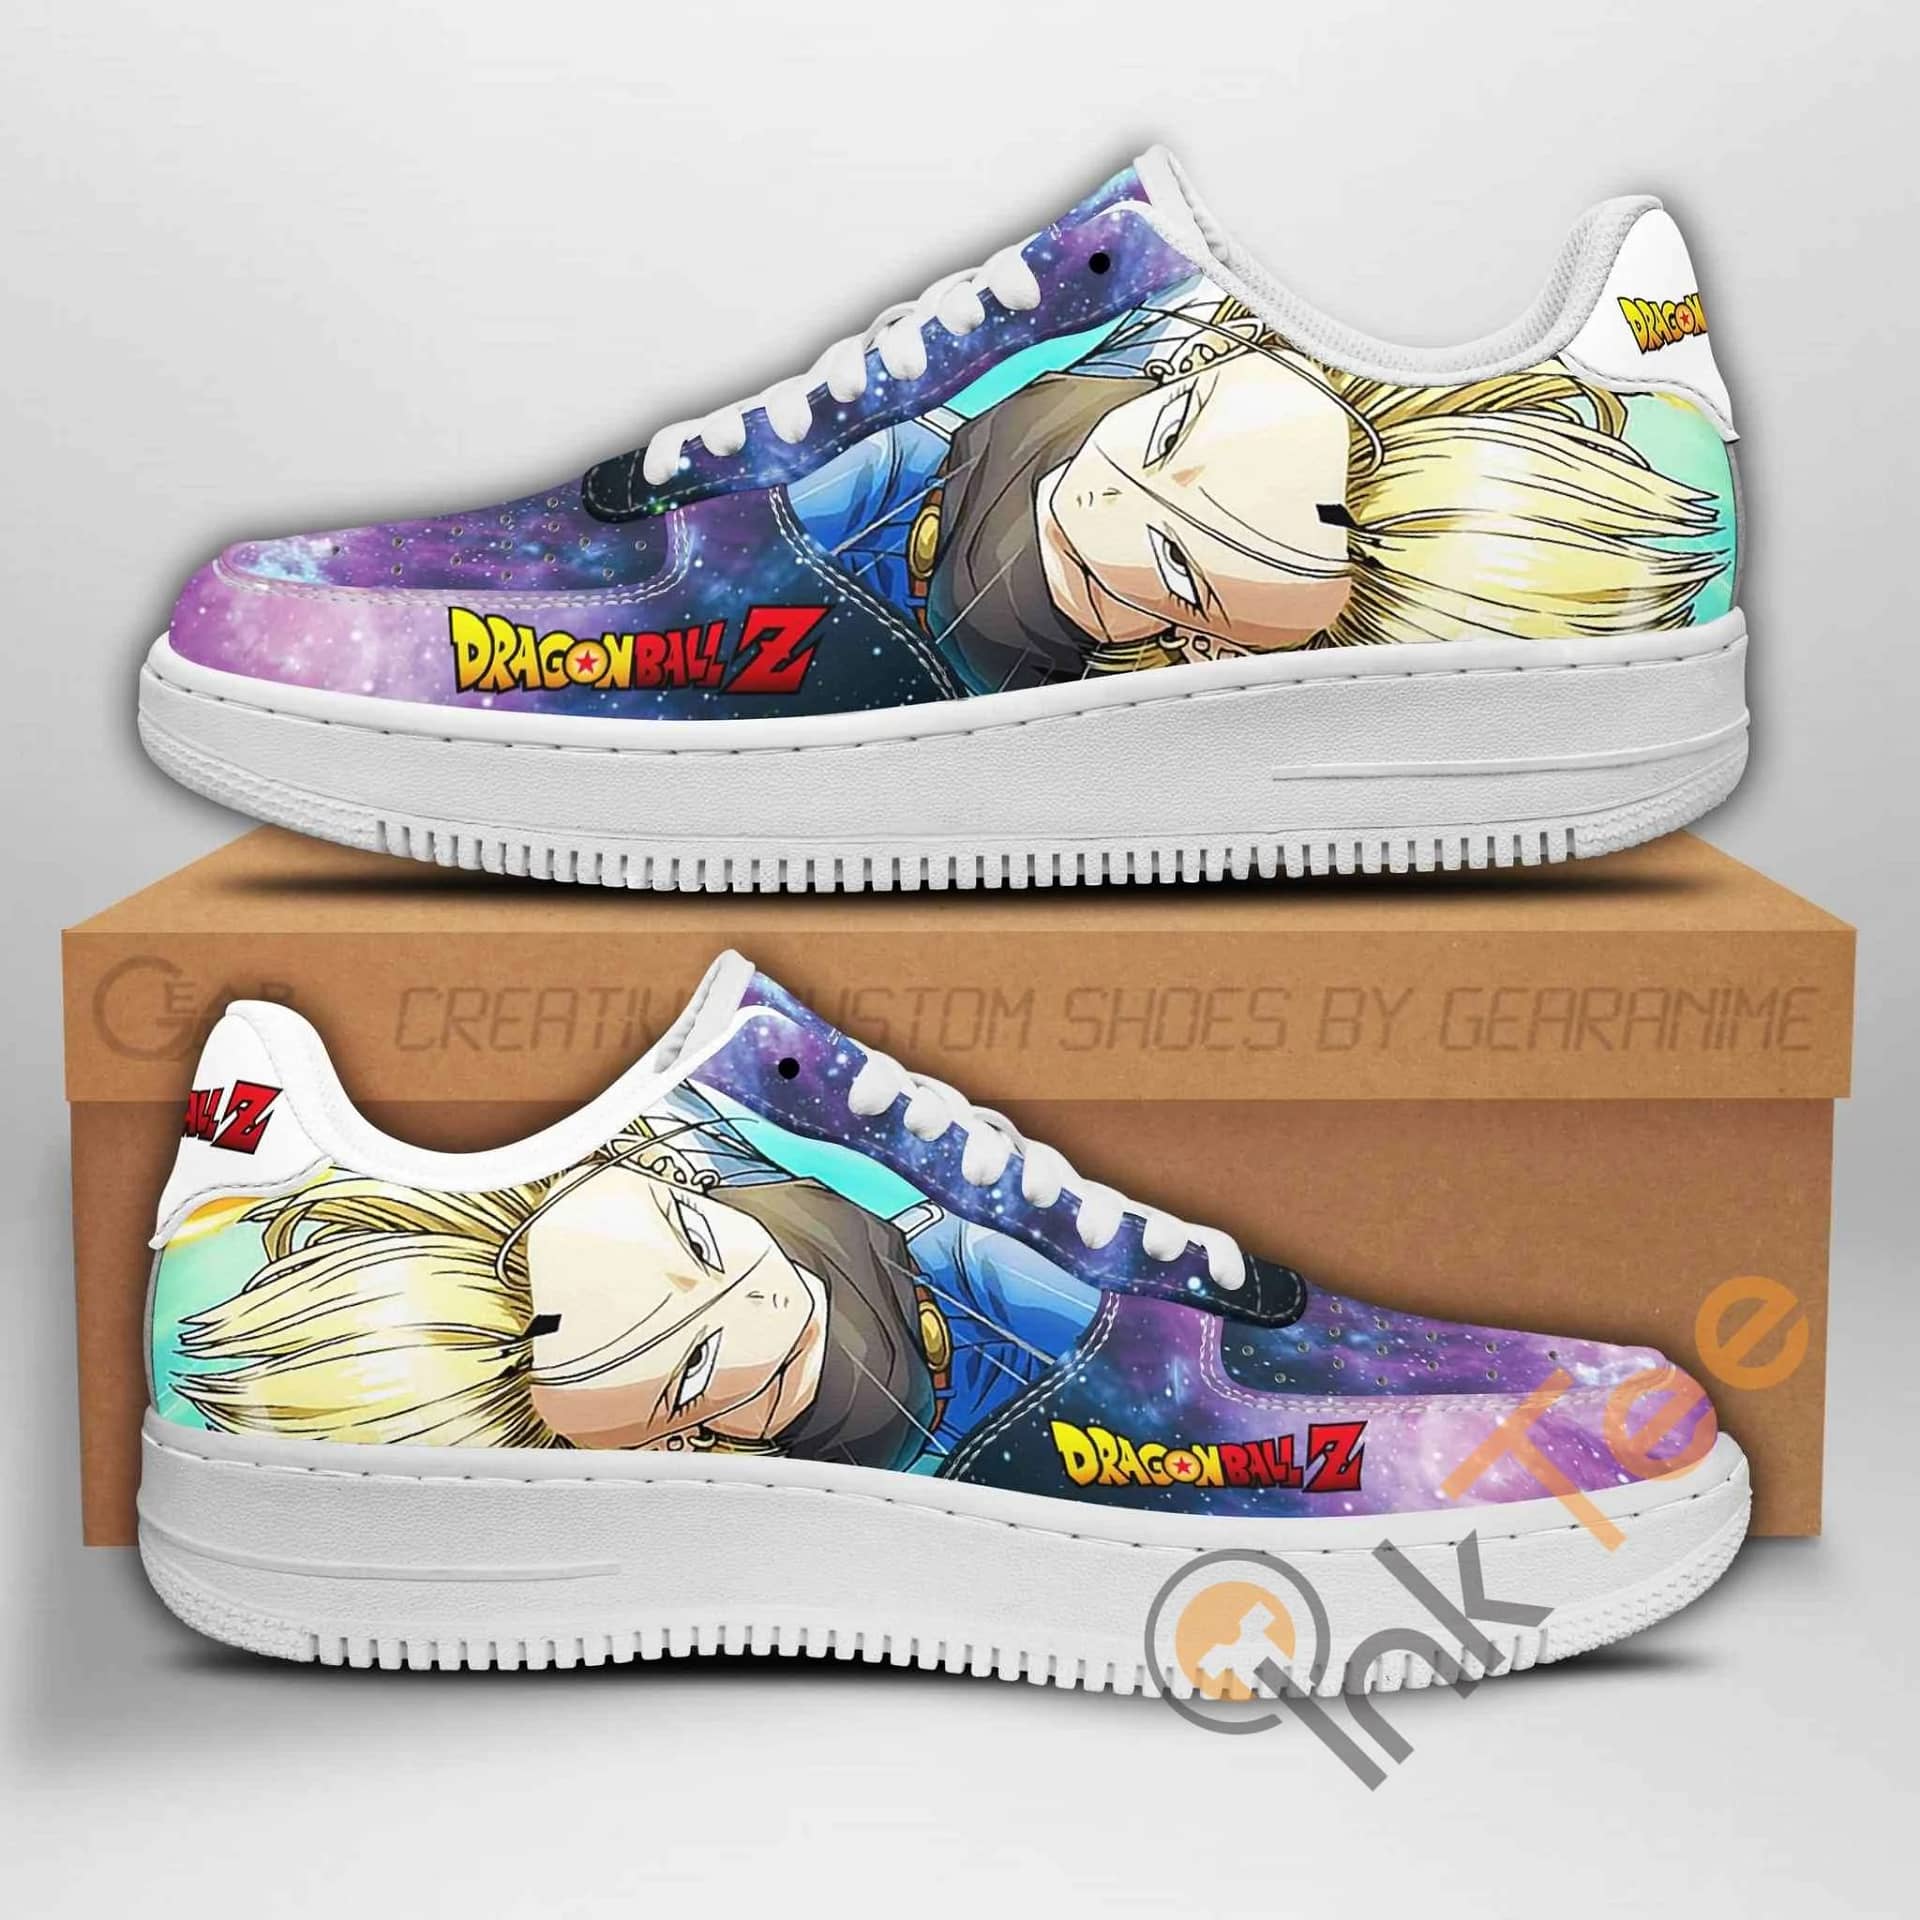 Android 18 Dragon Ball Z Anime Nike Air Force Shoes